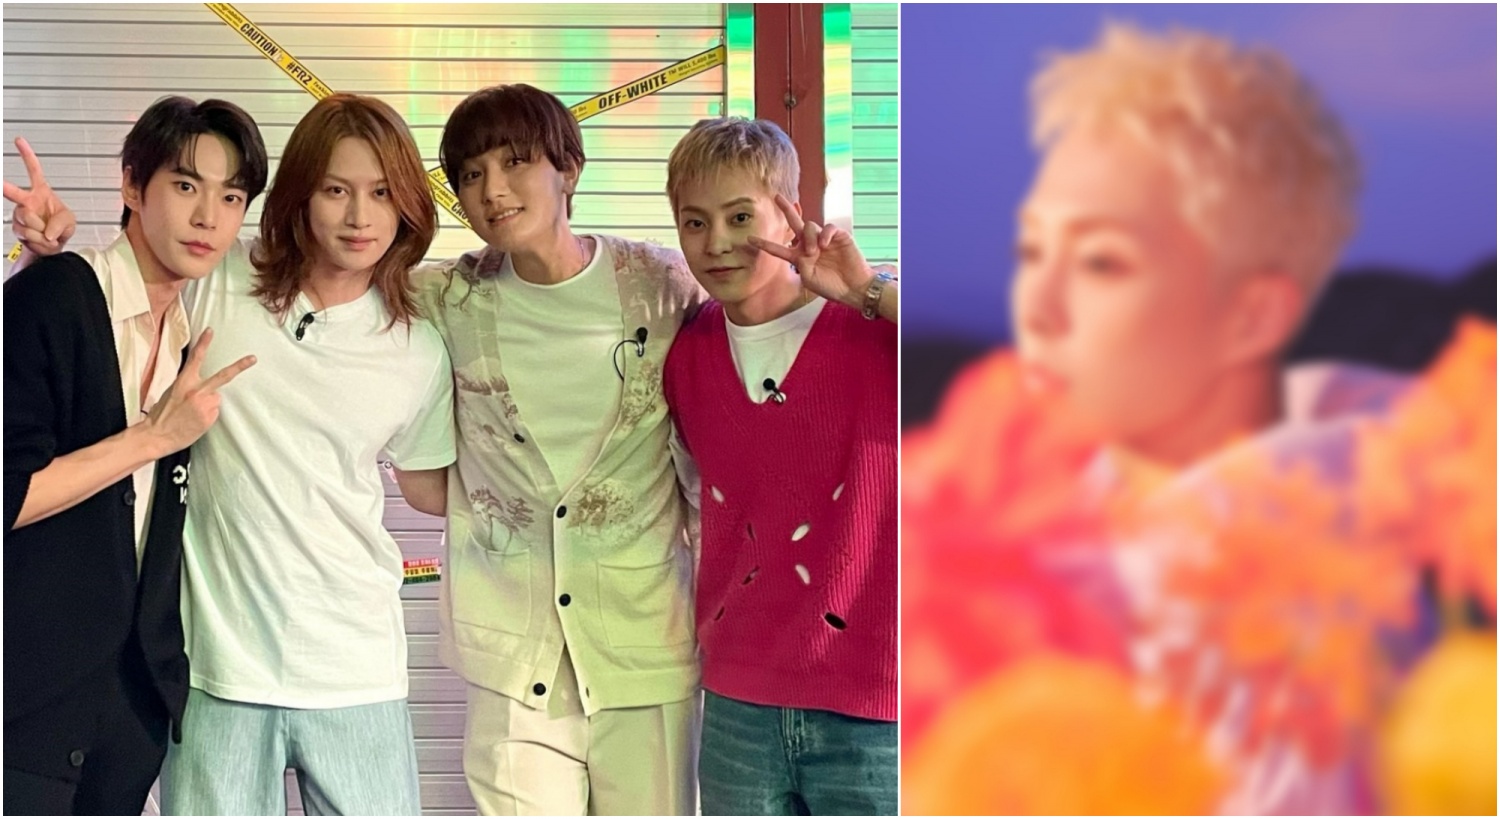 TEN Top Idol reveals she is OG’s “fairy tail” – and ELSA agree